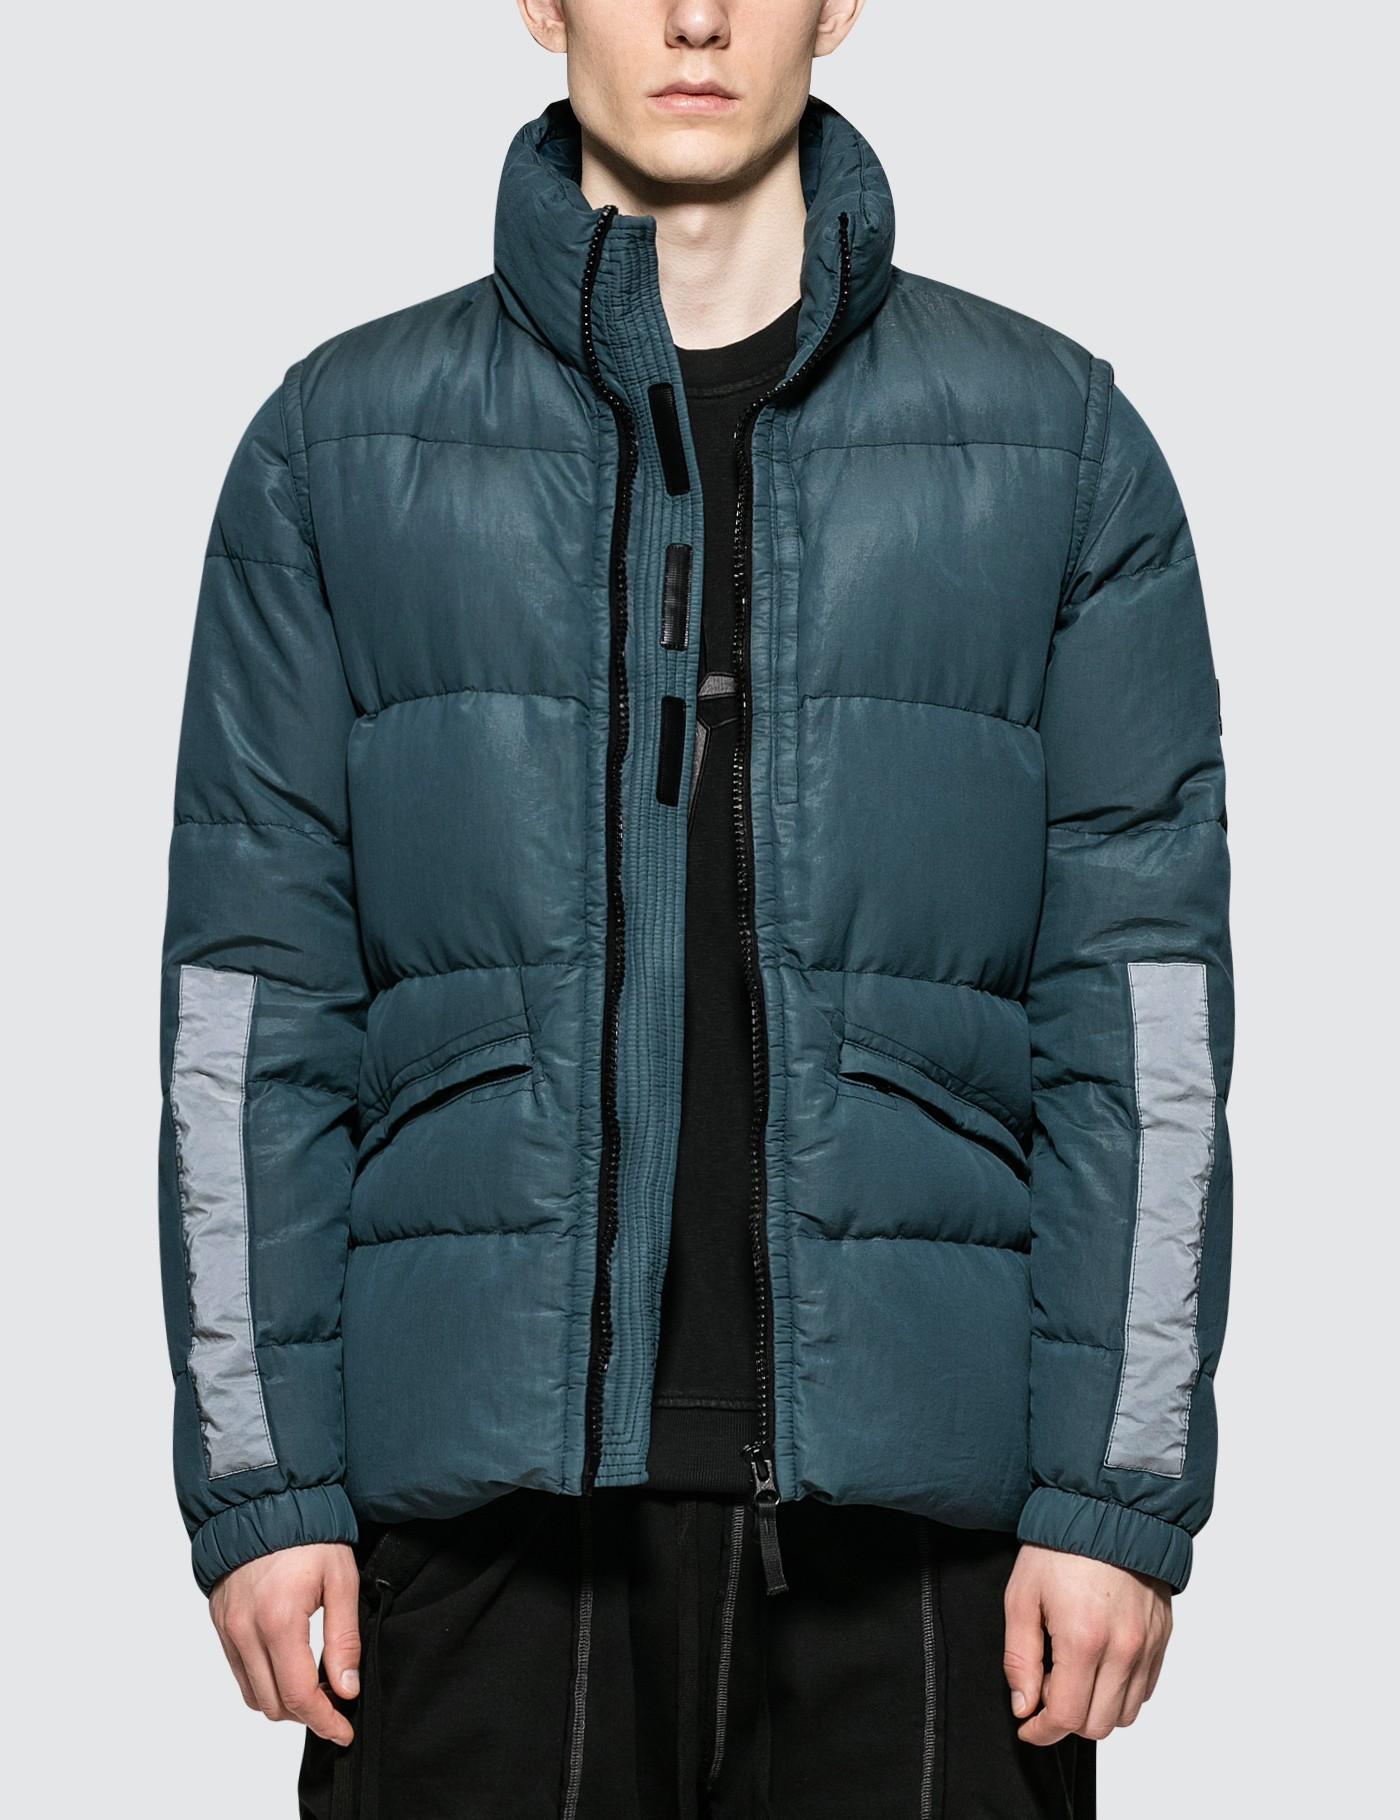 Stone Island Cotton Puffer Jacket in Blue for Men - Lyst